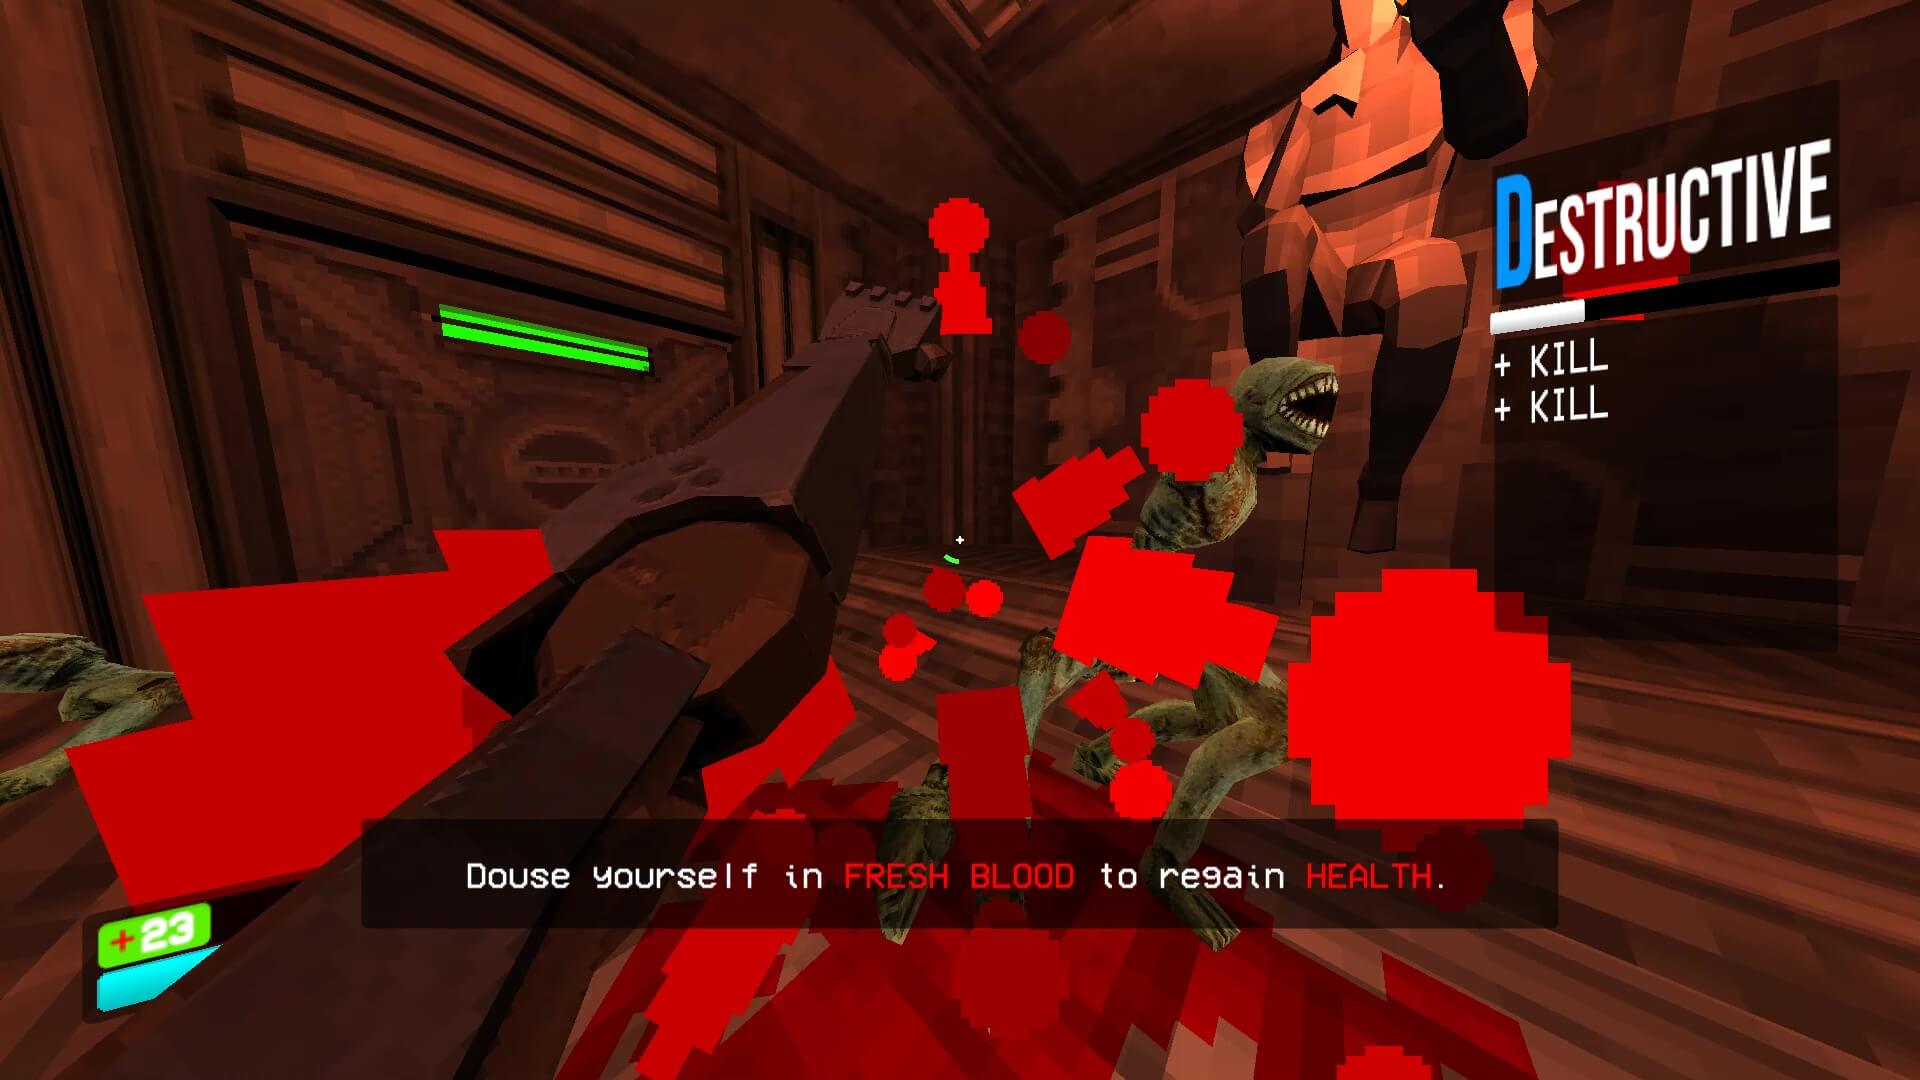 You must douse yourself in blood to survive in ULTRAKILL